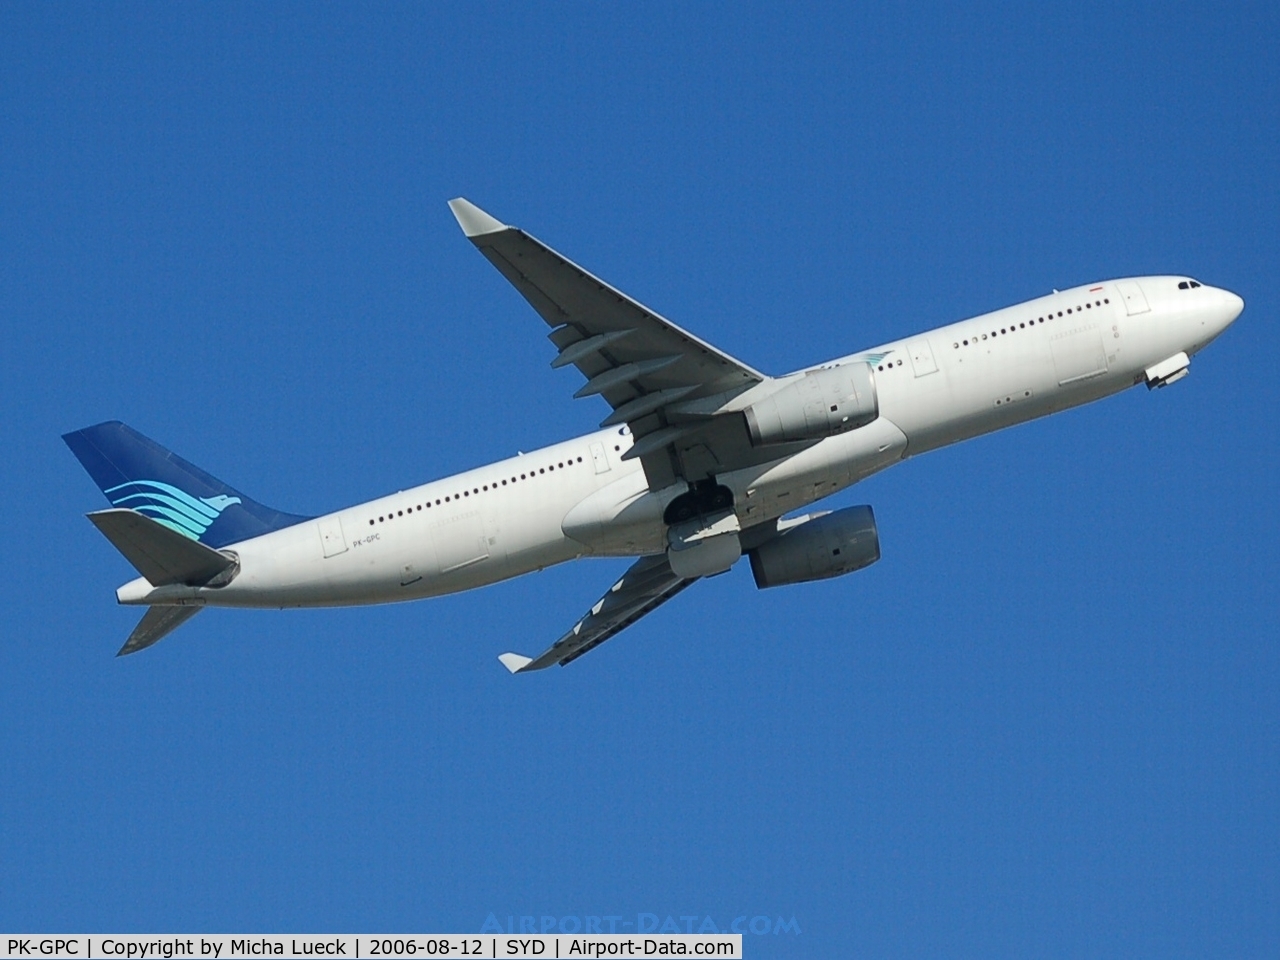 PK-GPC, 1996 Airbus A330-341 C/N 140, Climbing out of Sydney